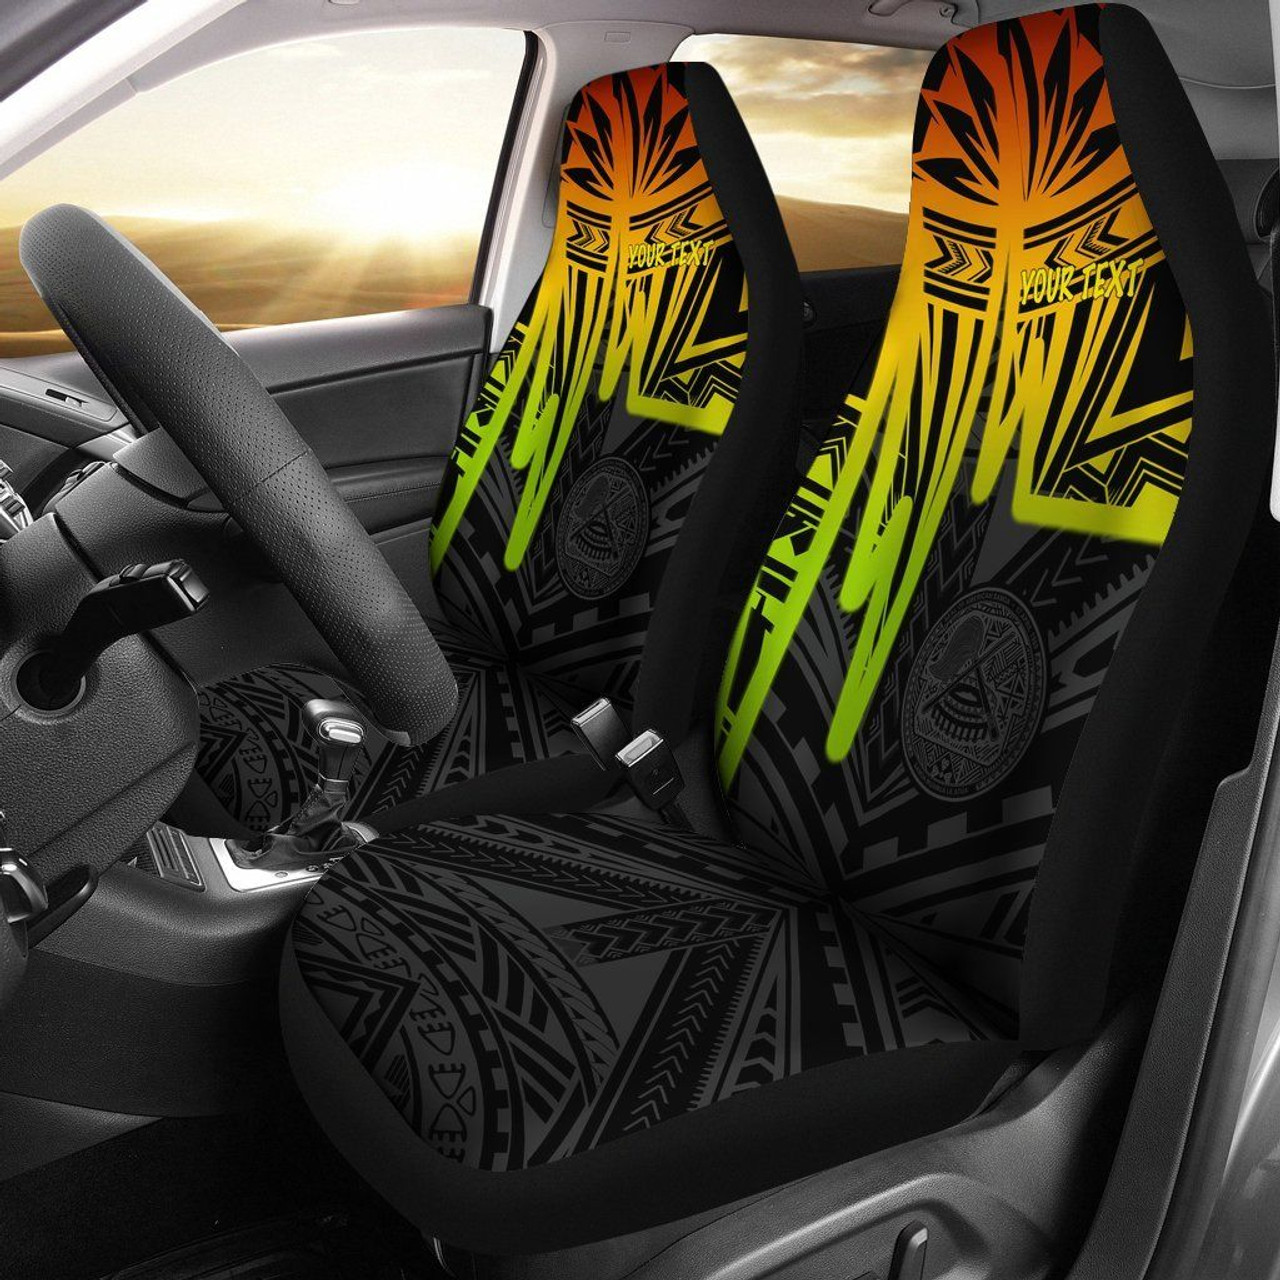 American Samoa Personalised Car Seat Covers - Seal With Polynesian Pattern Heartbeat Style (Reggae)